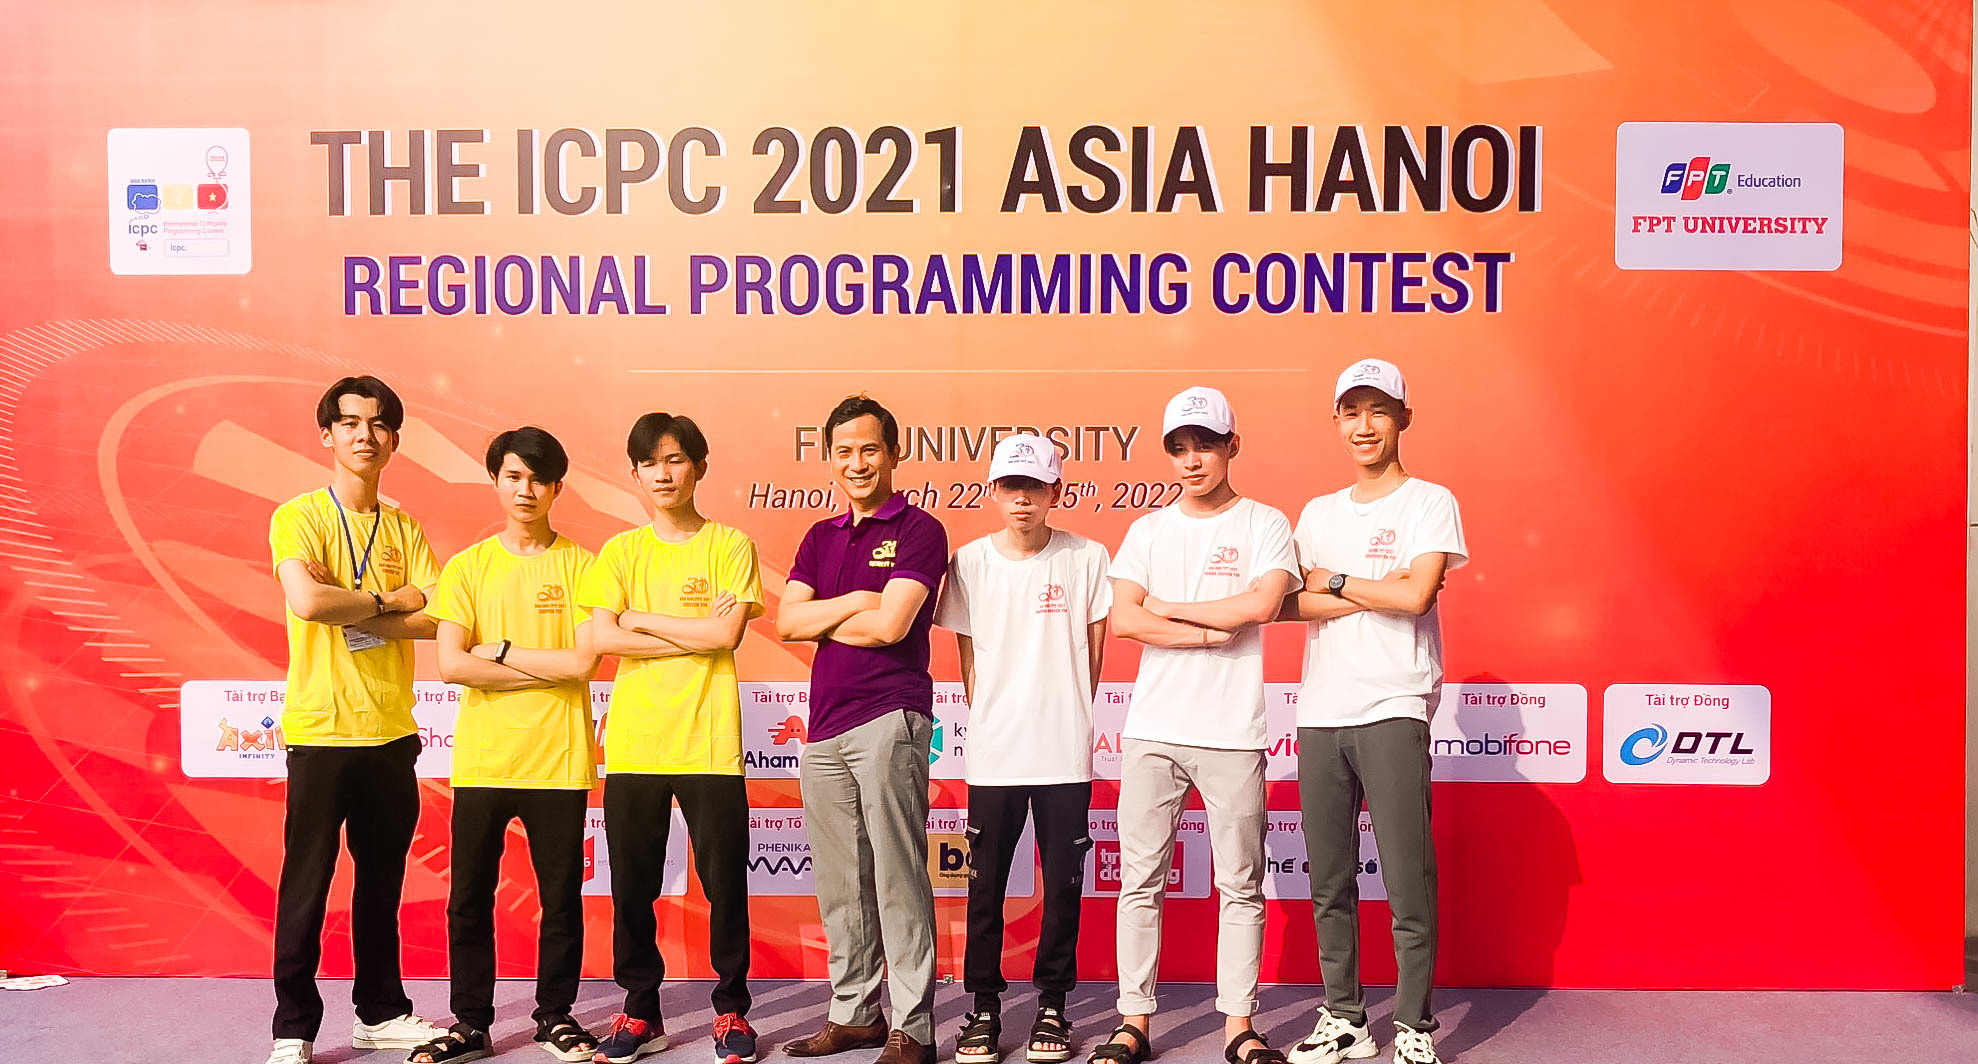 Central IT training school won the first prize at the Vietnam Student Informatics Olympiad